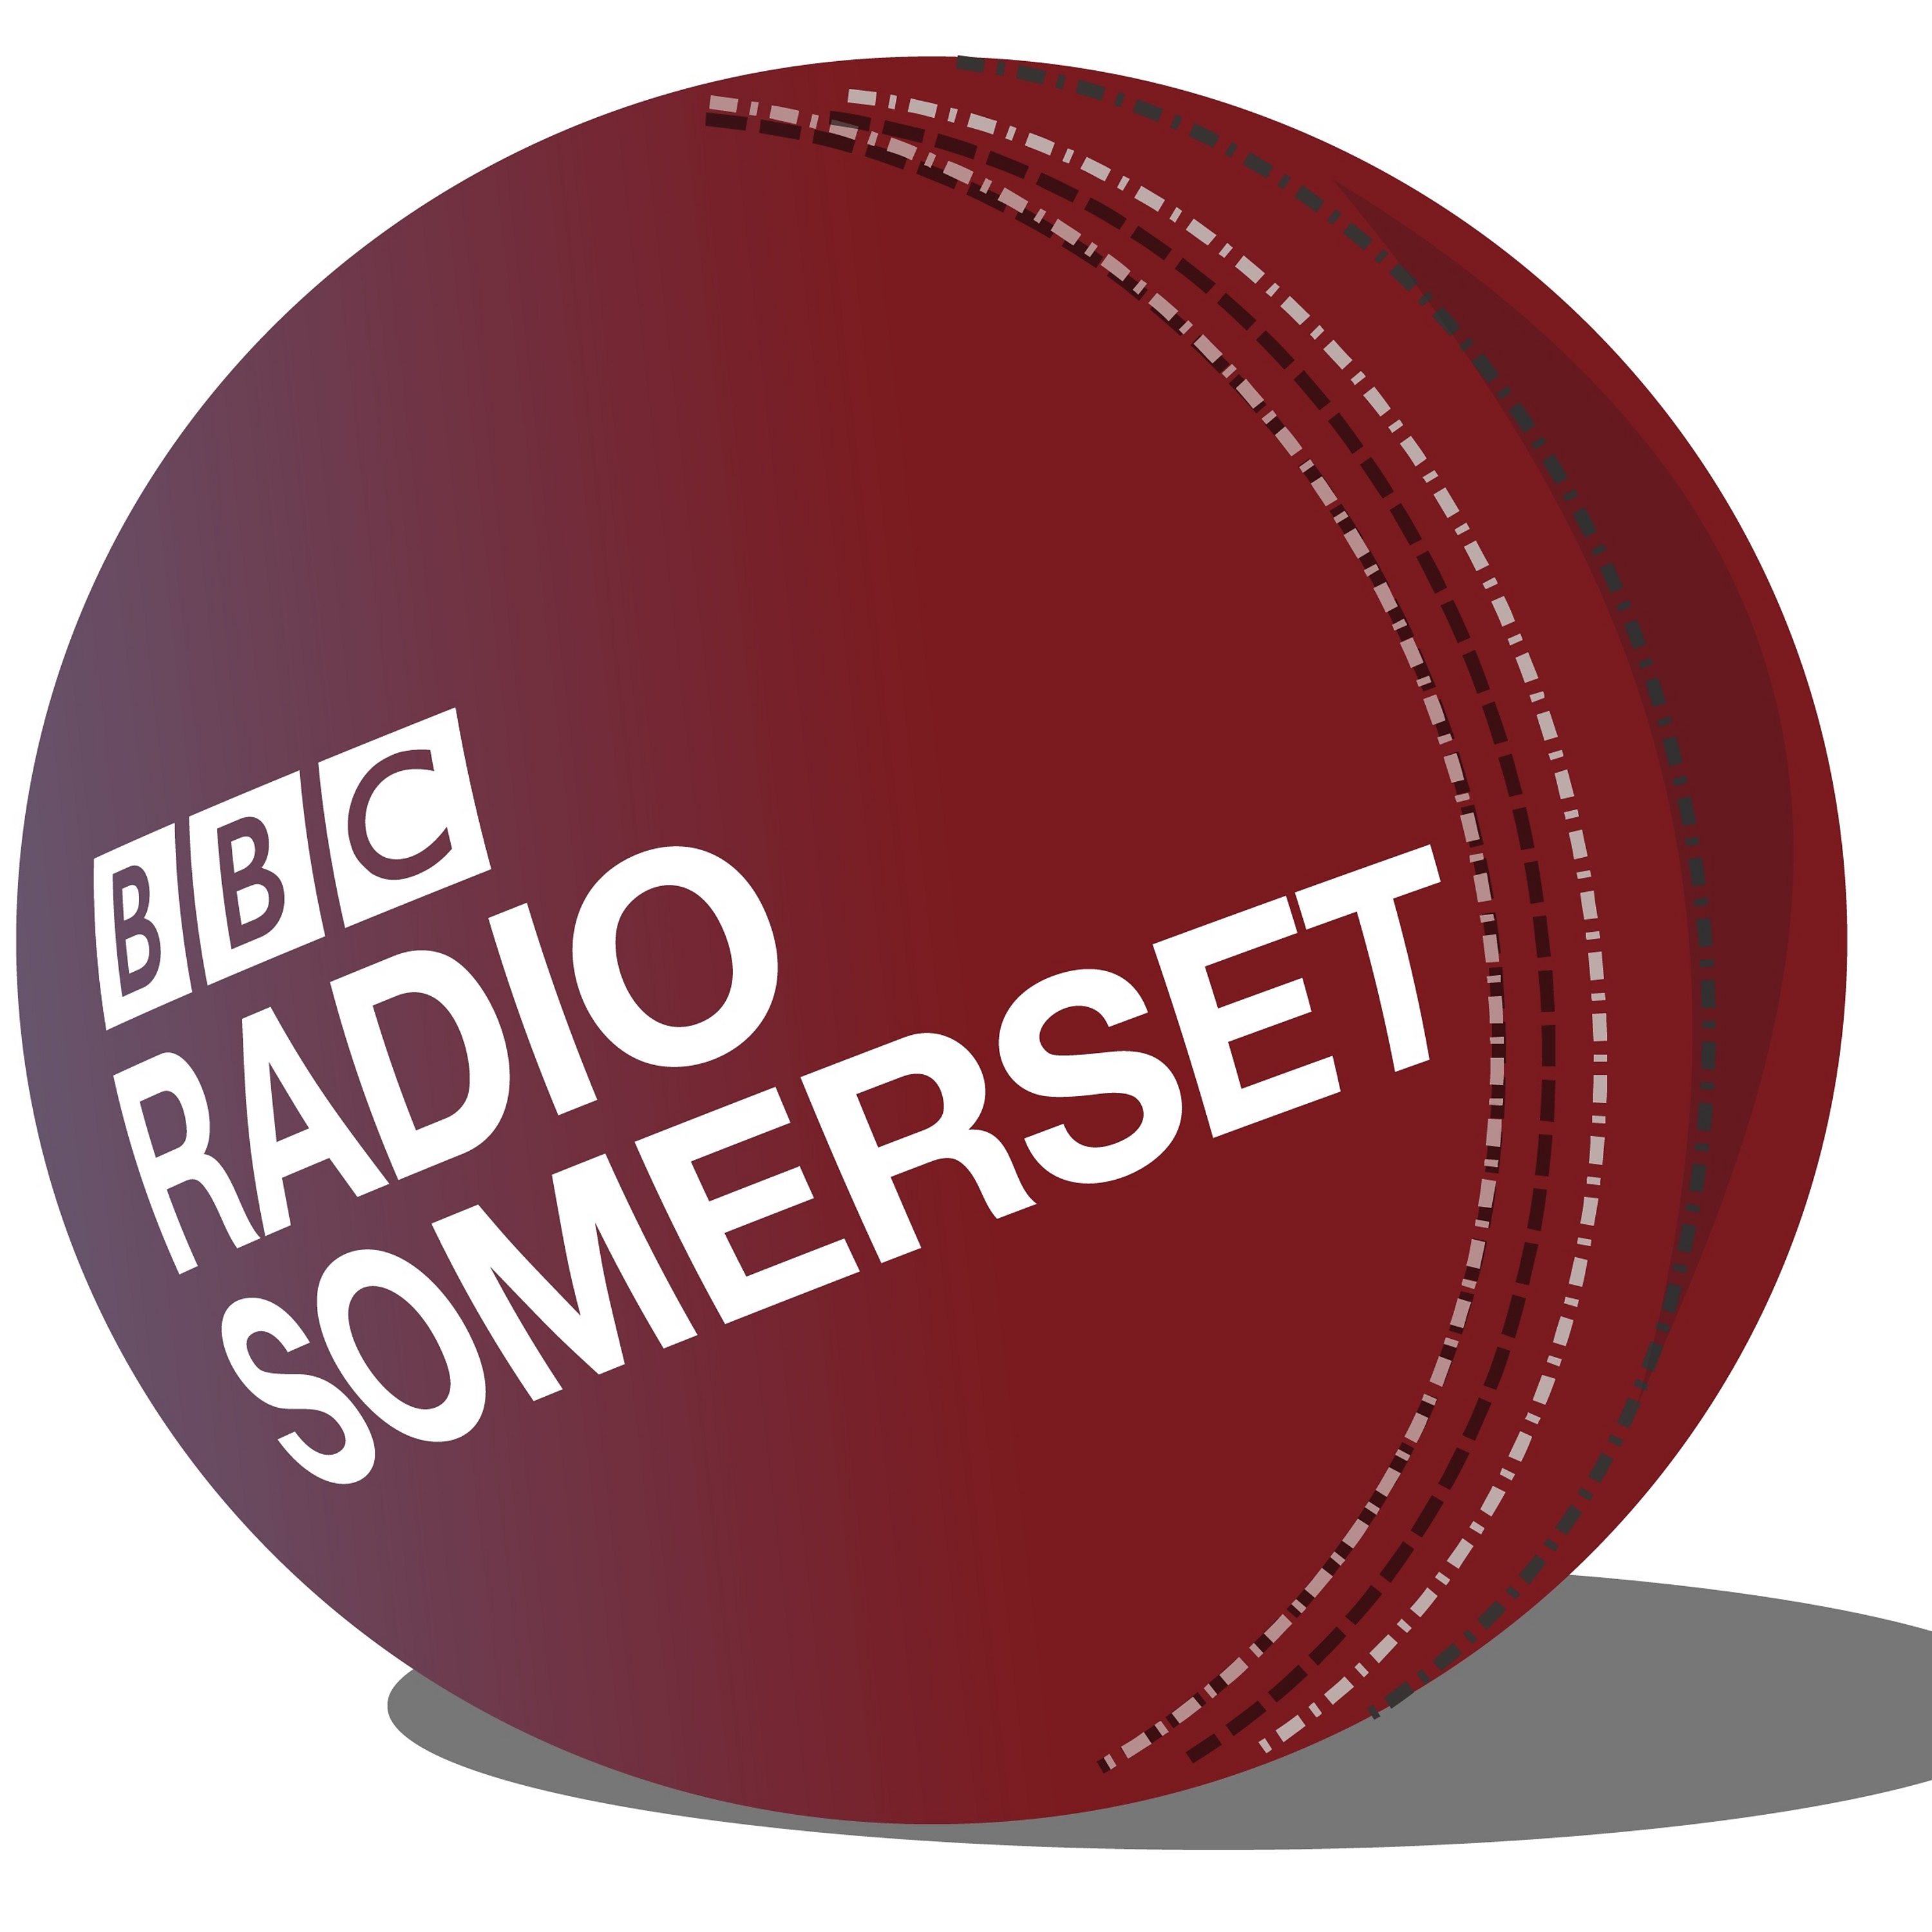 Somerset prepare for Lord's